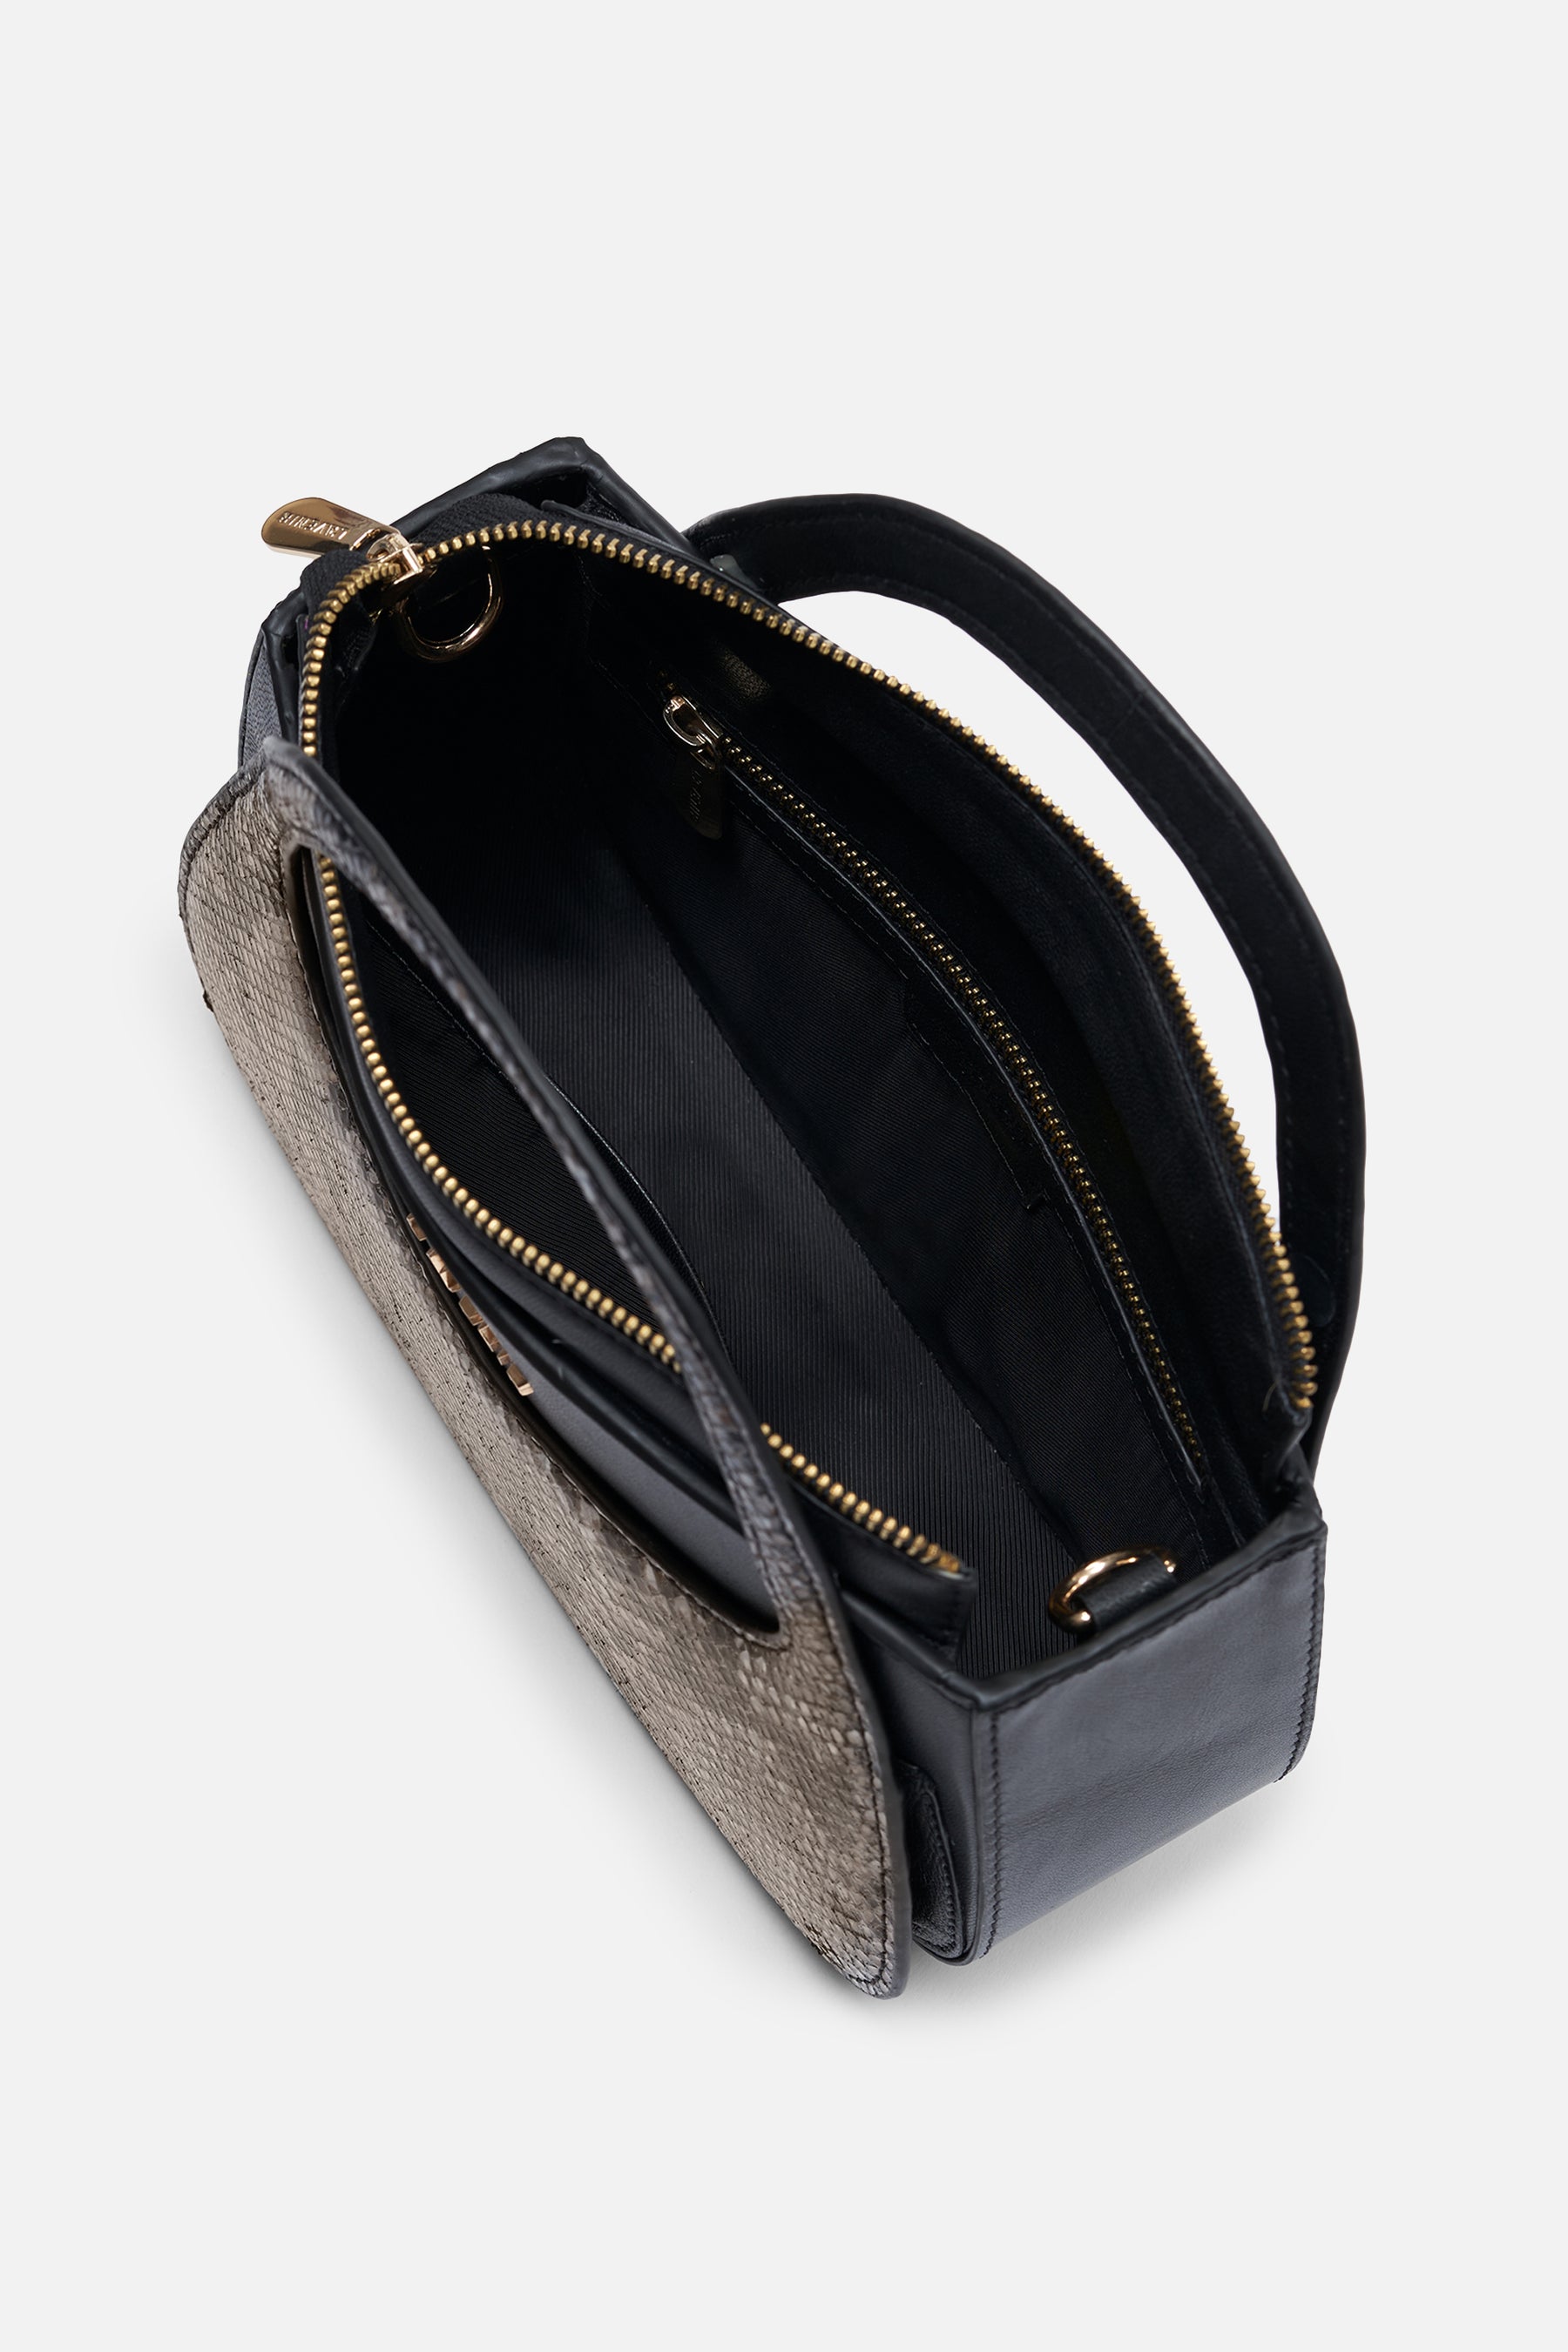 L'avenir - Moon Sling With Additional Pearl handle - Black With Python Print